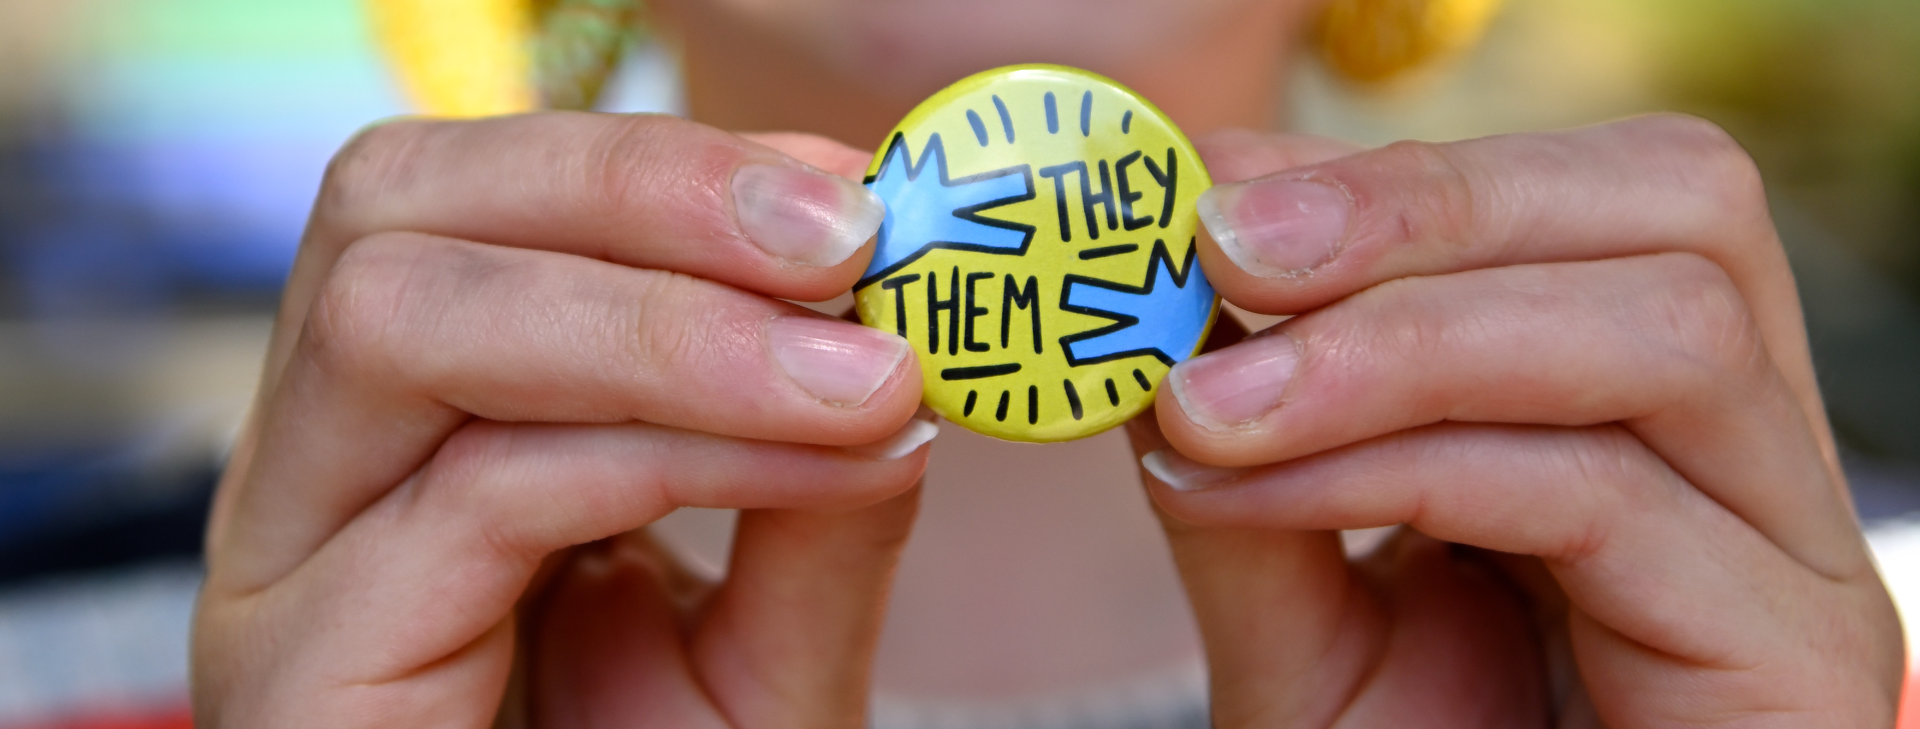 Student holding a they-them pronoun badge